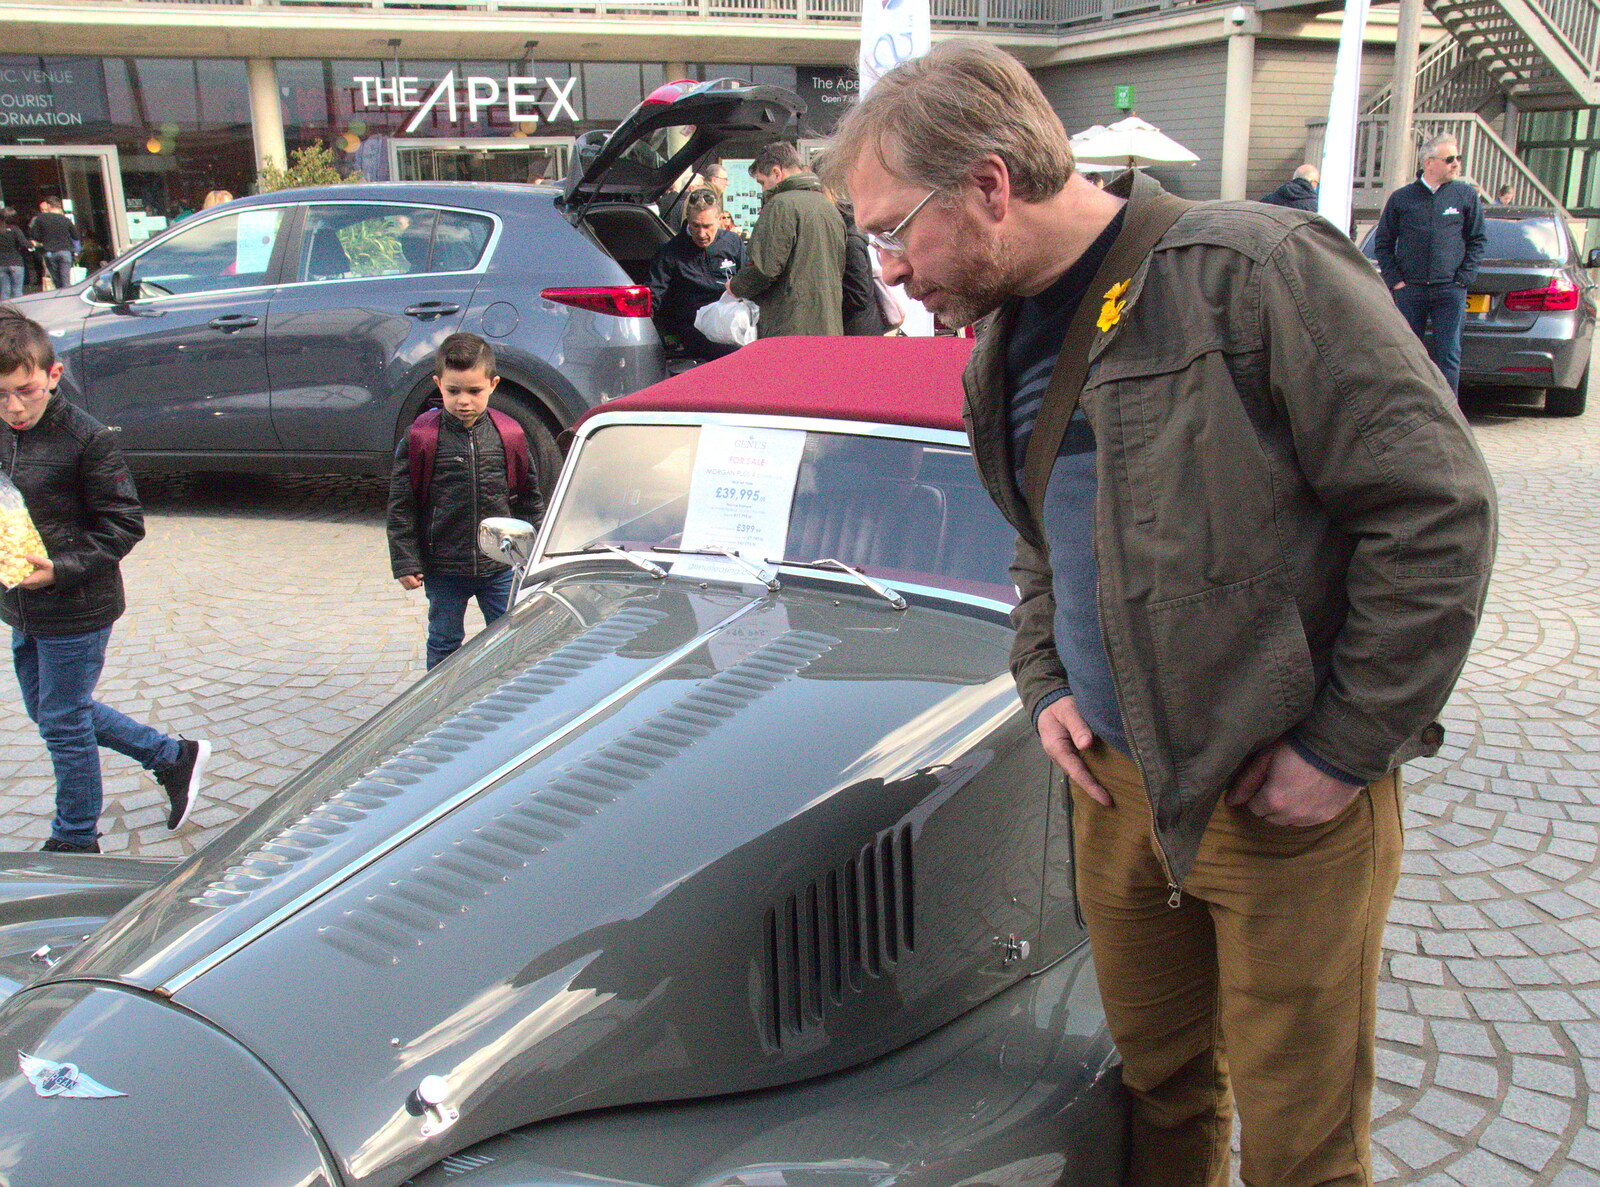 Marc checks out a Morgan from The East Anglian Beer Festival, Bury St Edmunds, Suffolk - 23rd April 2016